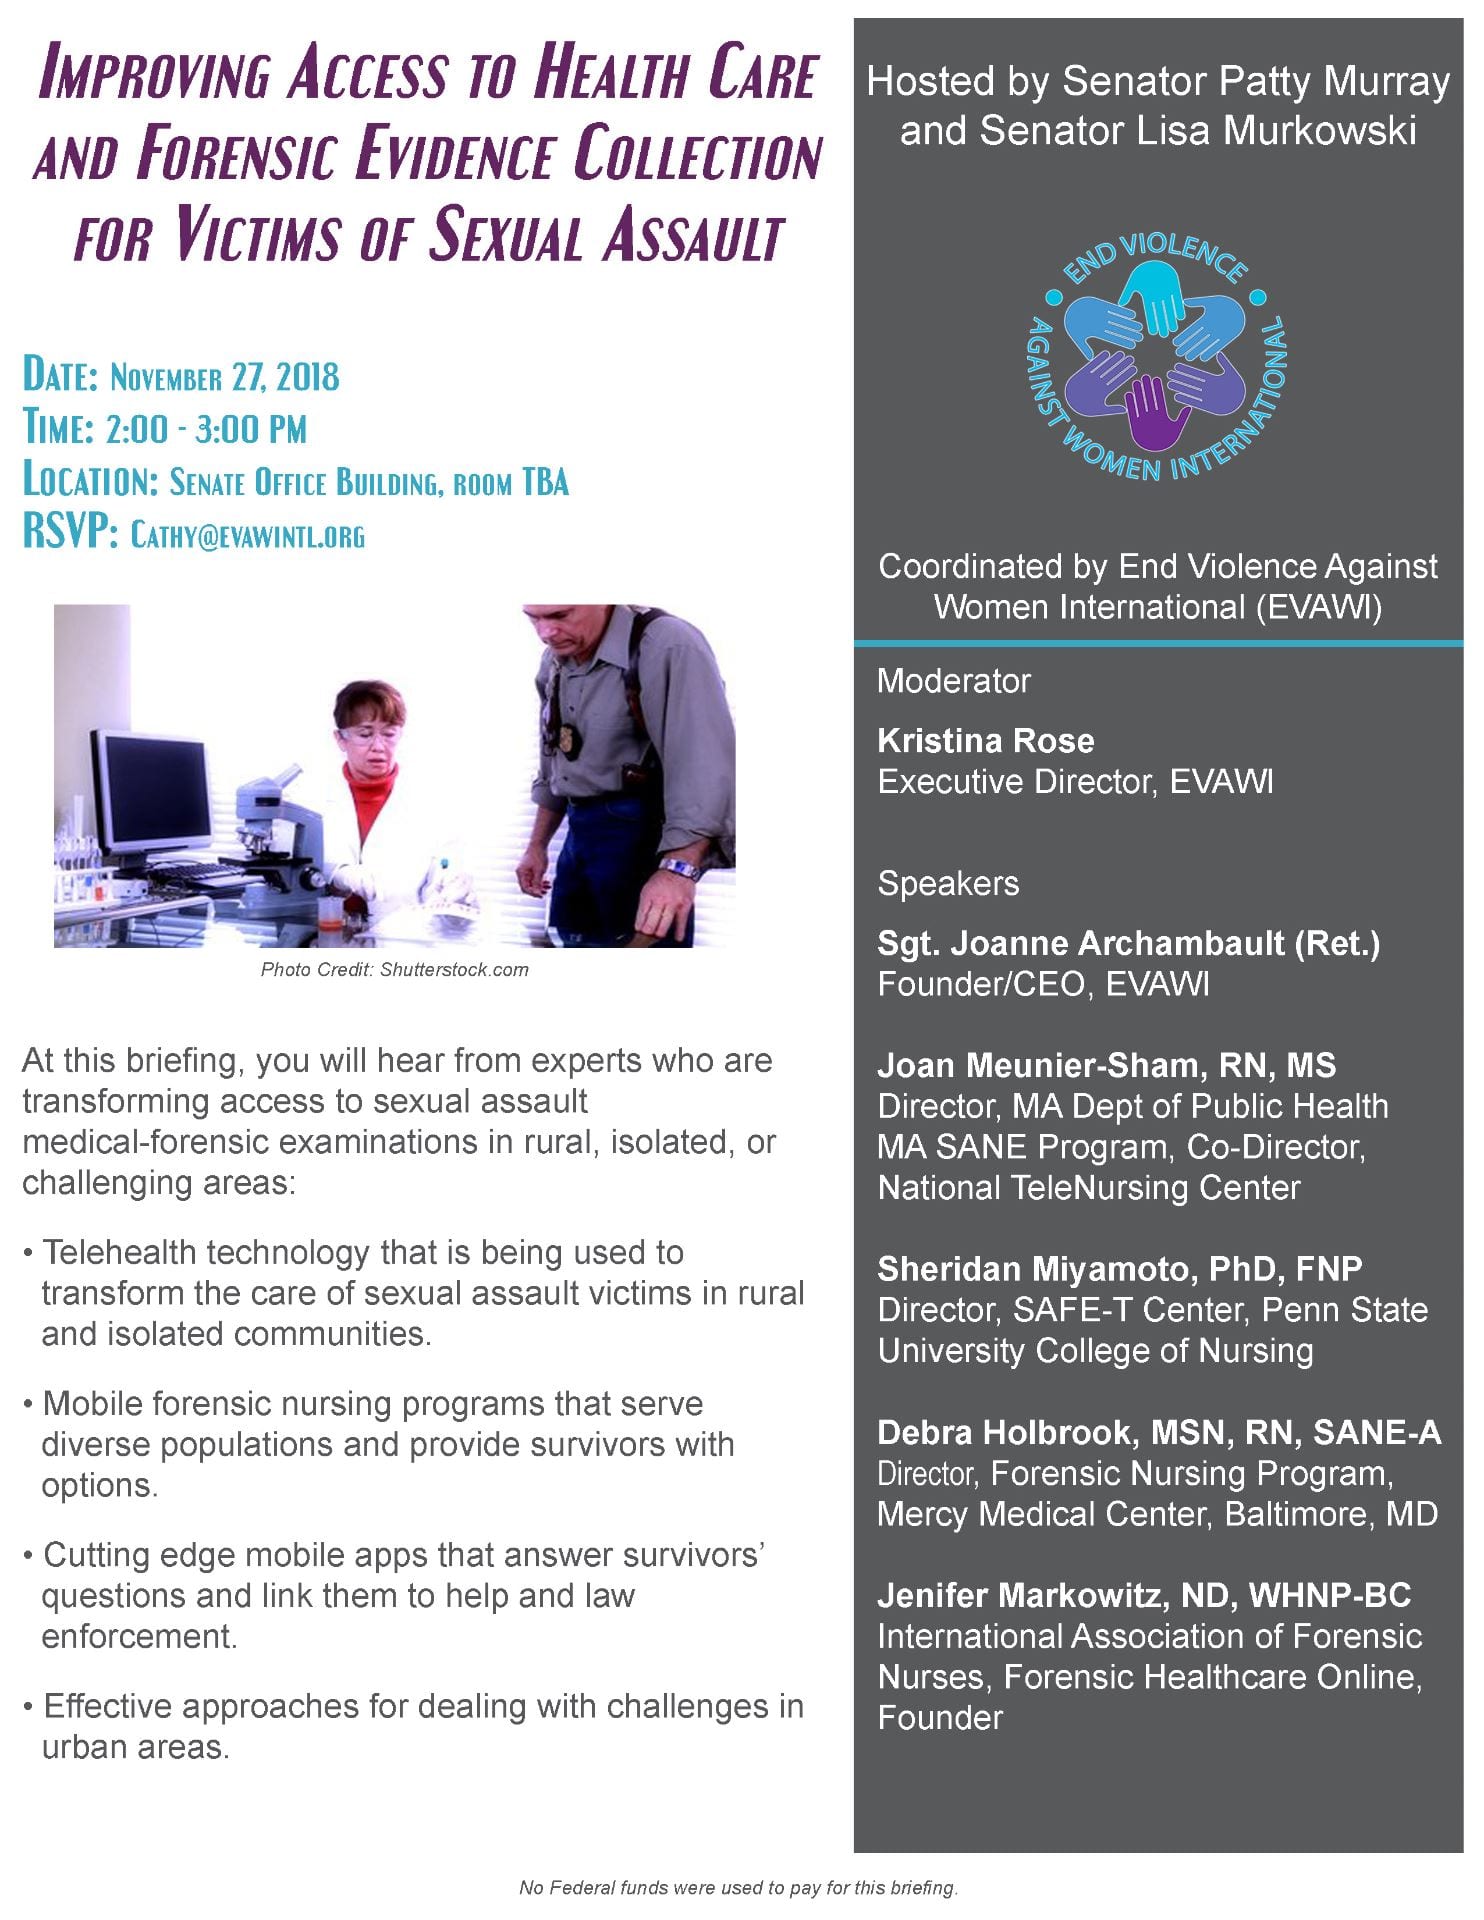 Improving Access to health care and forensic evidence collection for victims of sexual assult - november 27, 2018